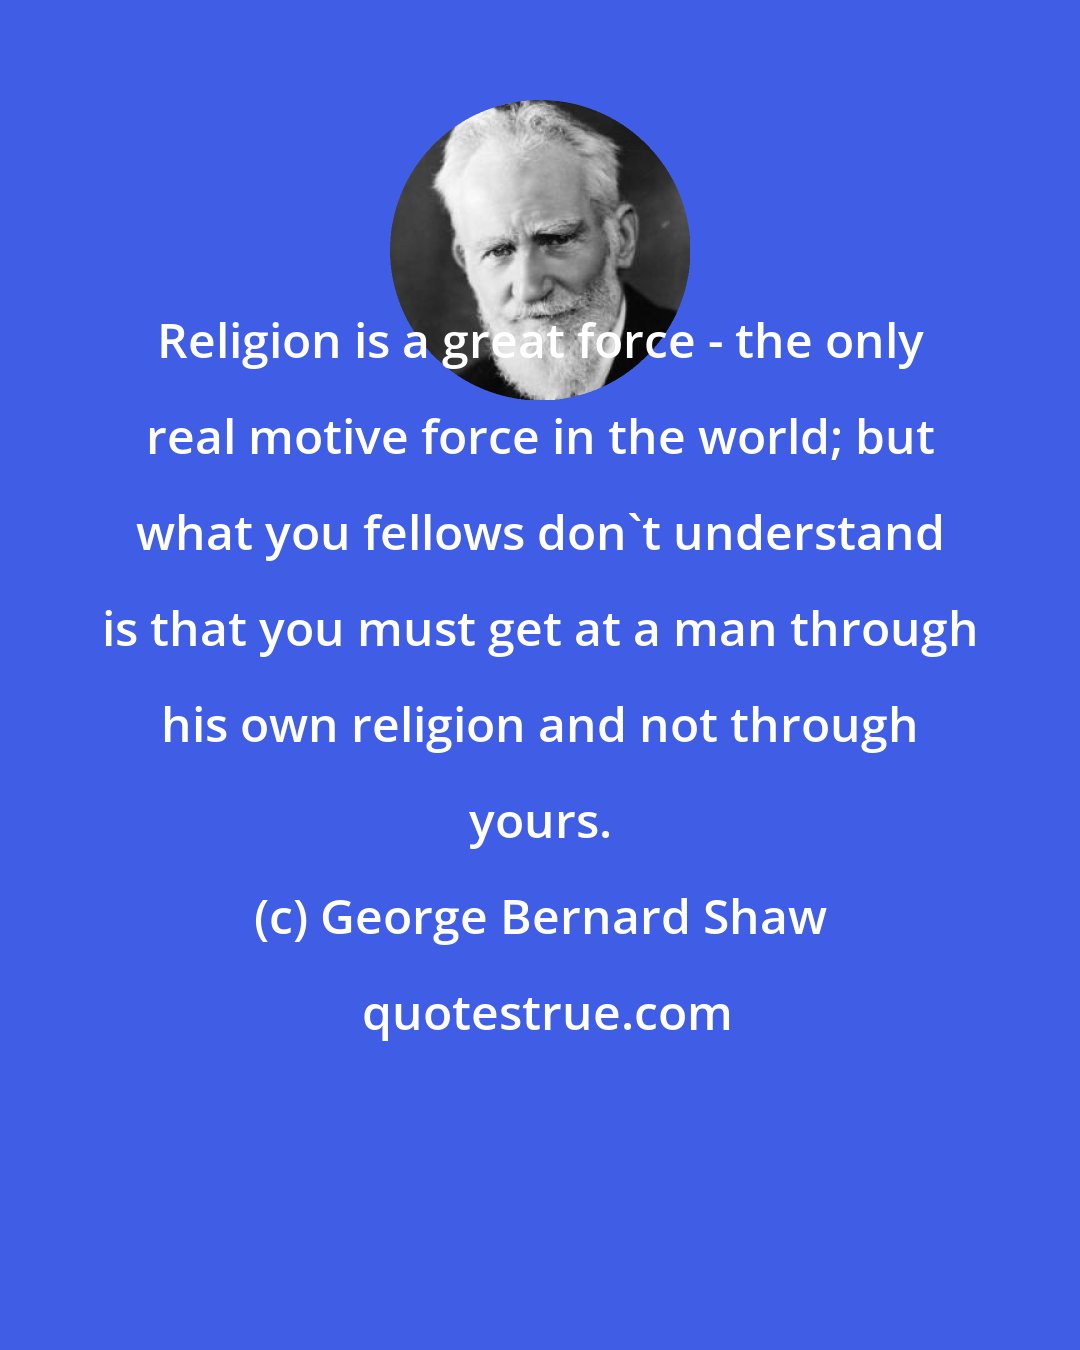 George Bernard Shaw: Religion is a great force - the only real motive force in the world; but what you fellows don't understand is that you must get at a man through his own religion and not through yours.